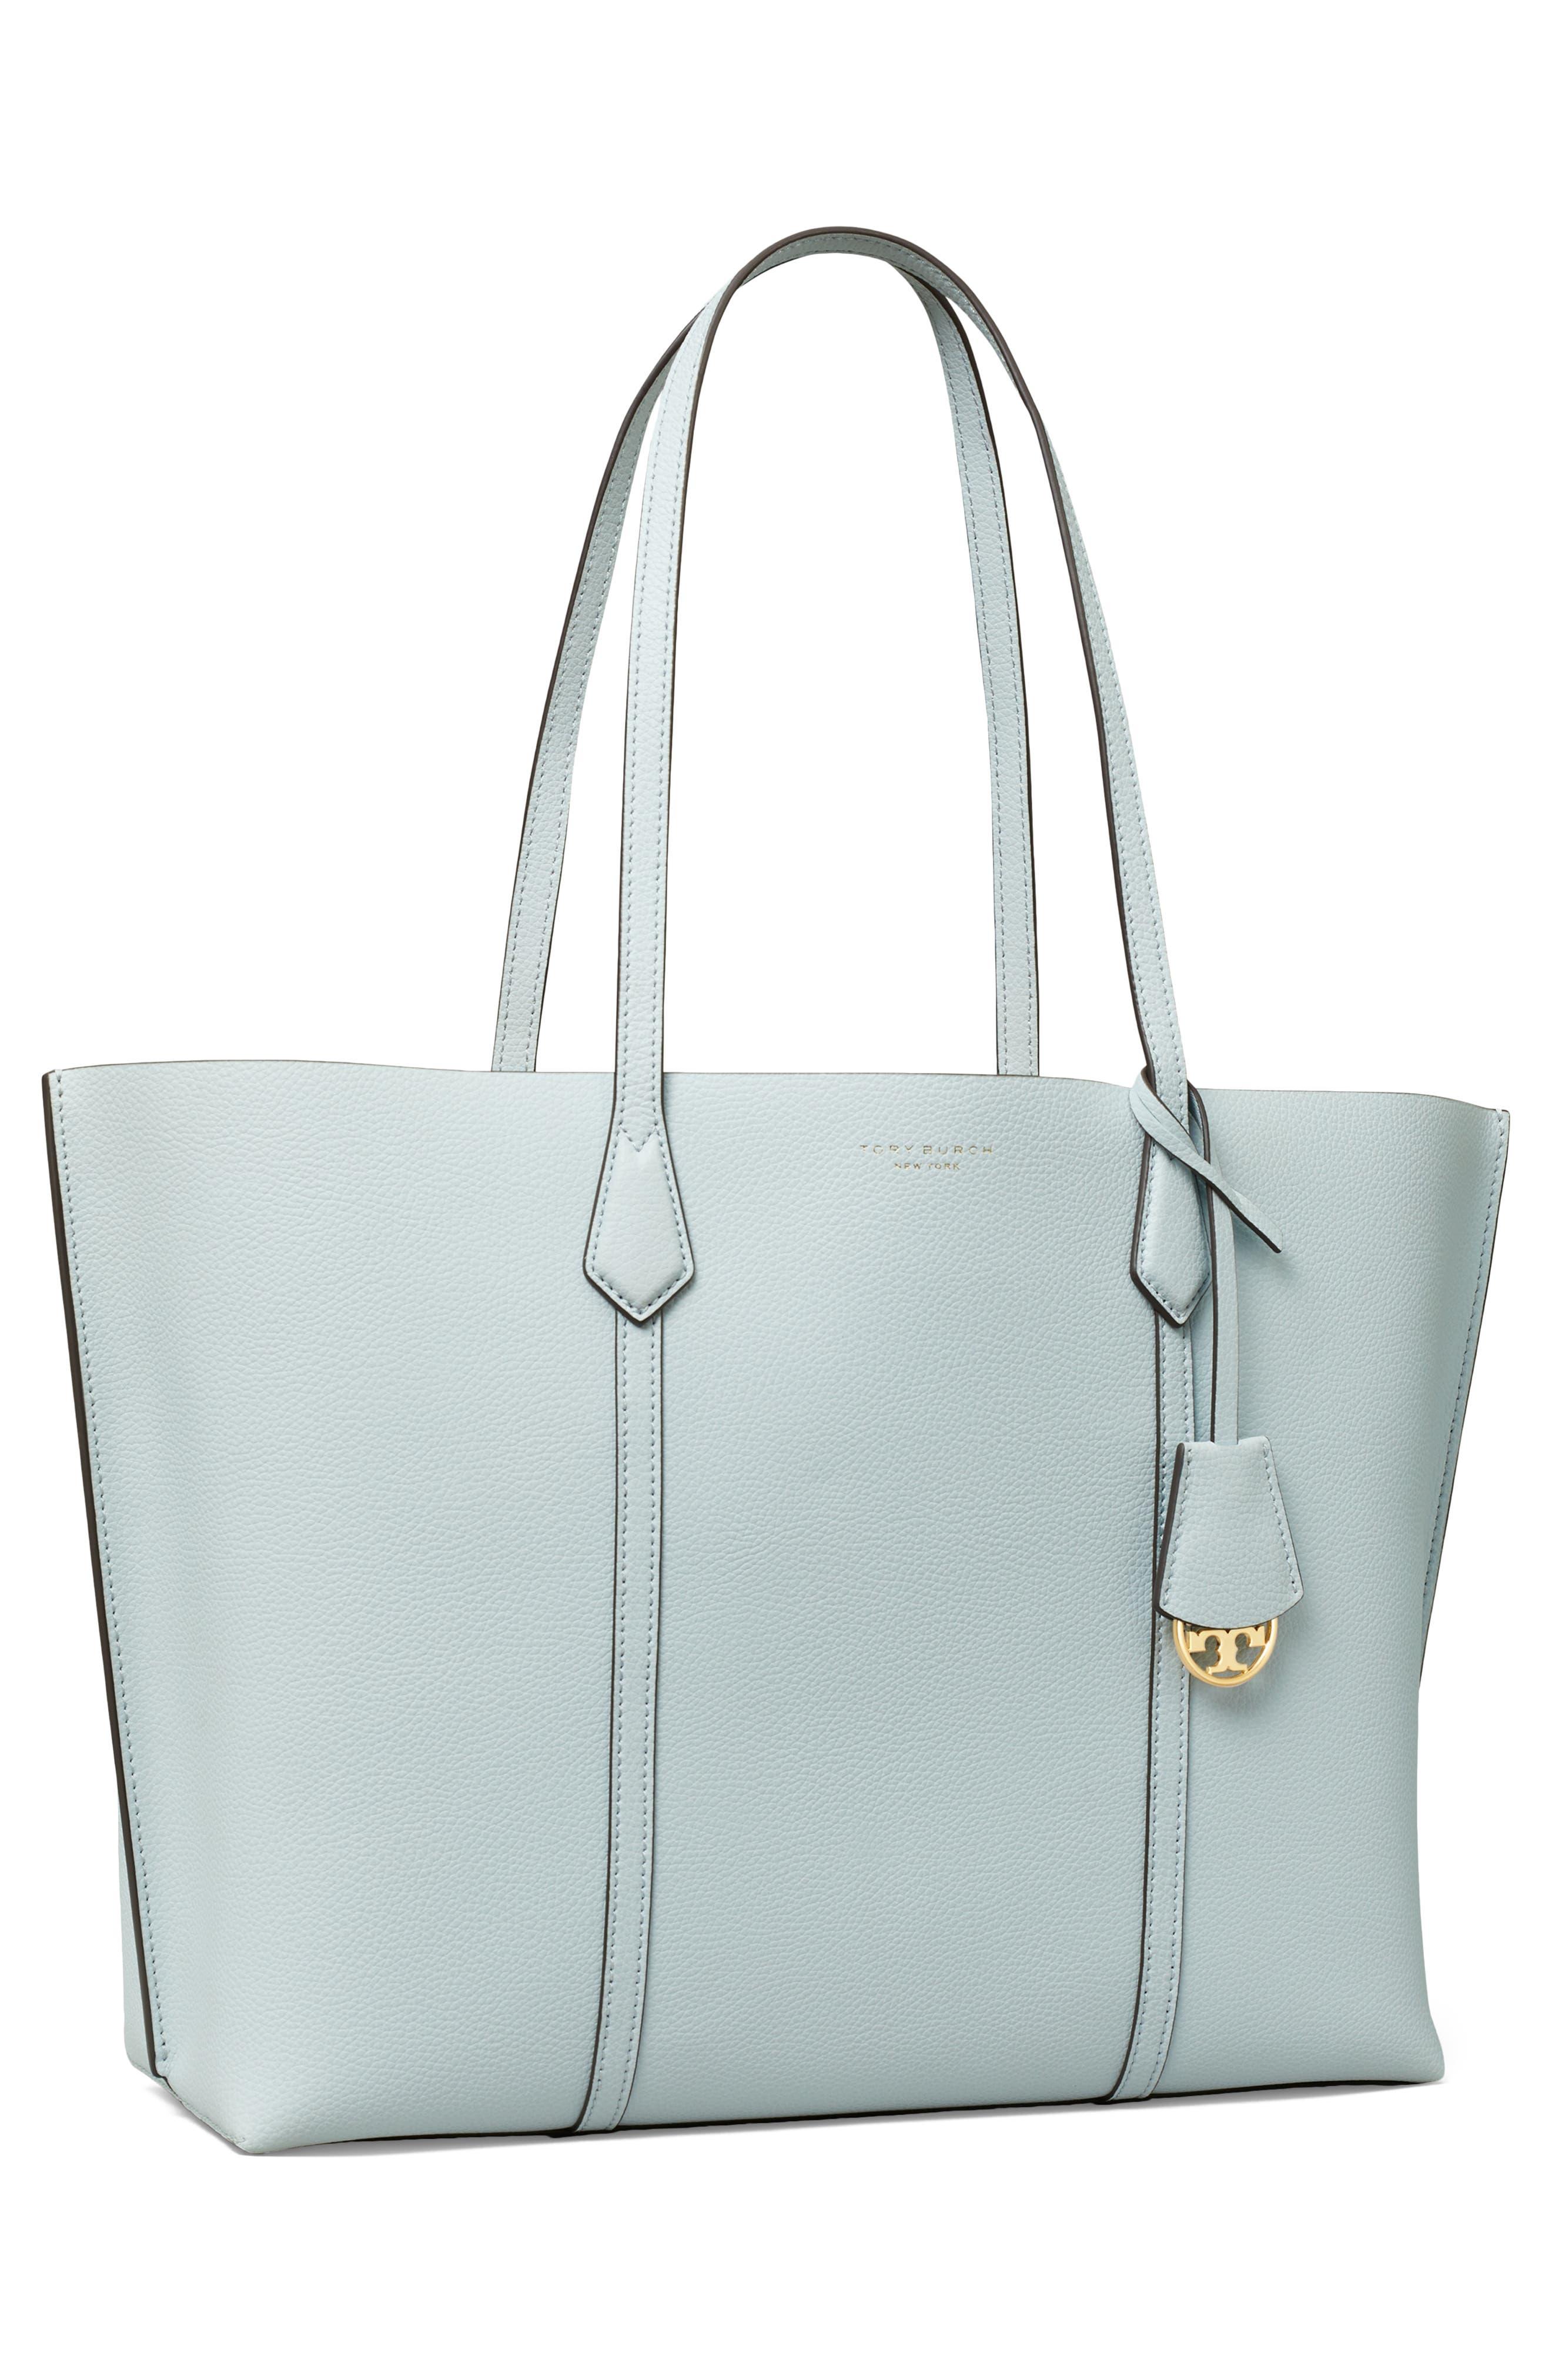 Tory Burch Women's Perry Leather Tote